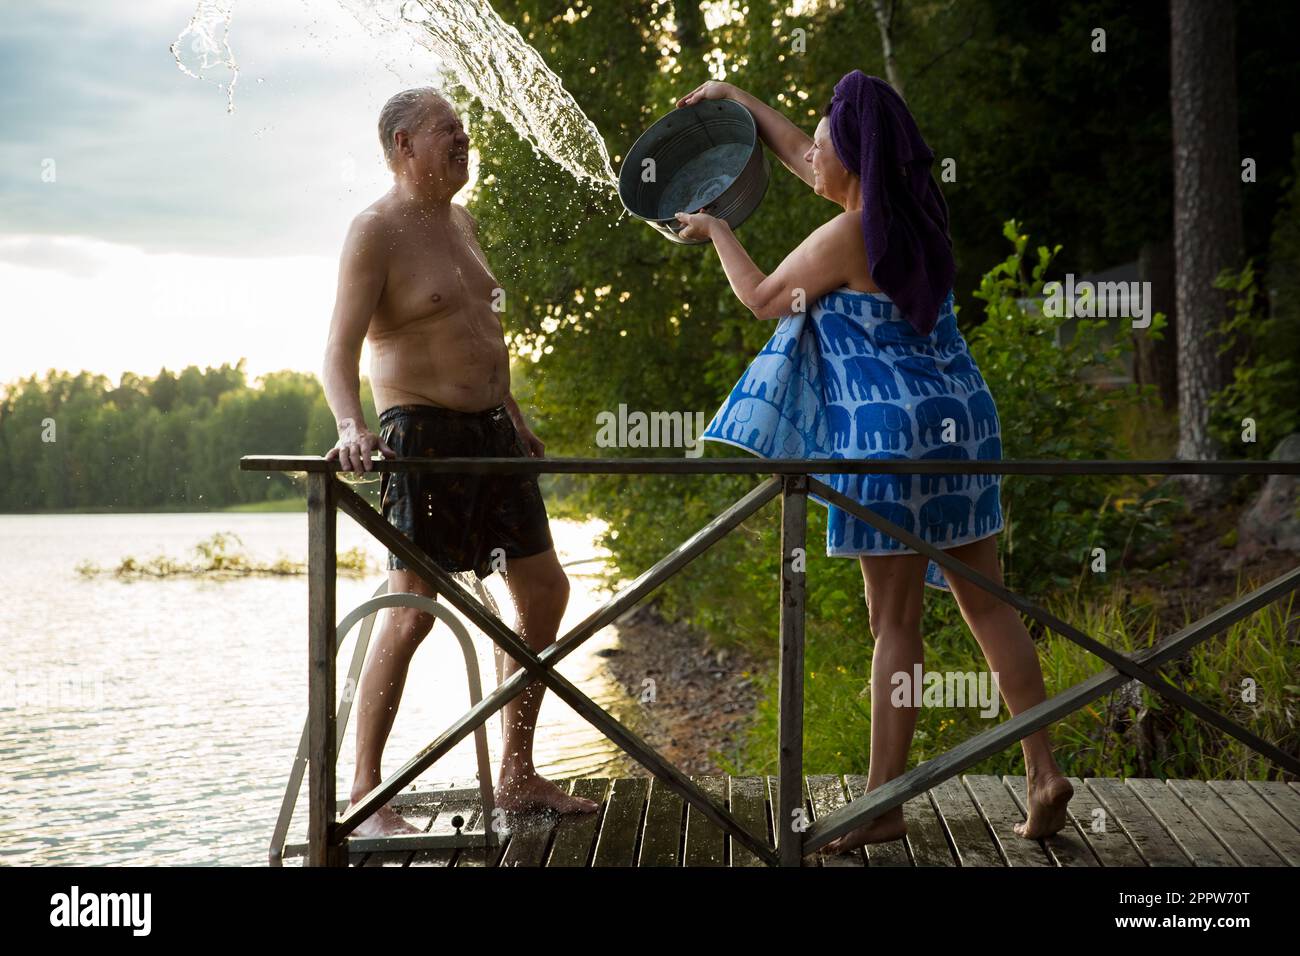 Aged couple having fun after Finnish sauna on wooden cottage pier in a lake. Mature woman pouring cold water from basin over her partner. Finland Stock Photo